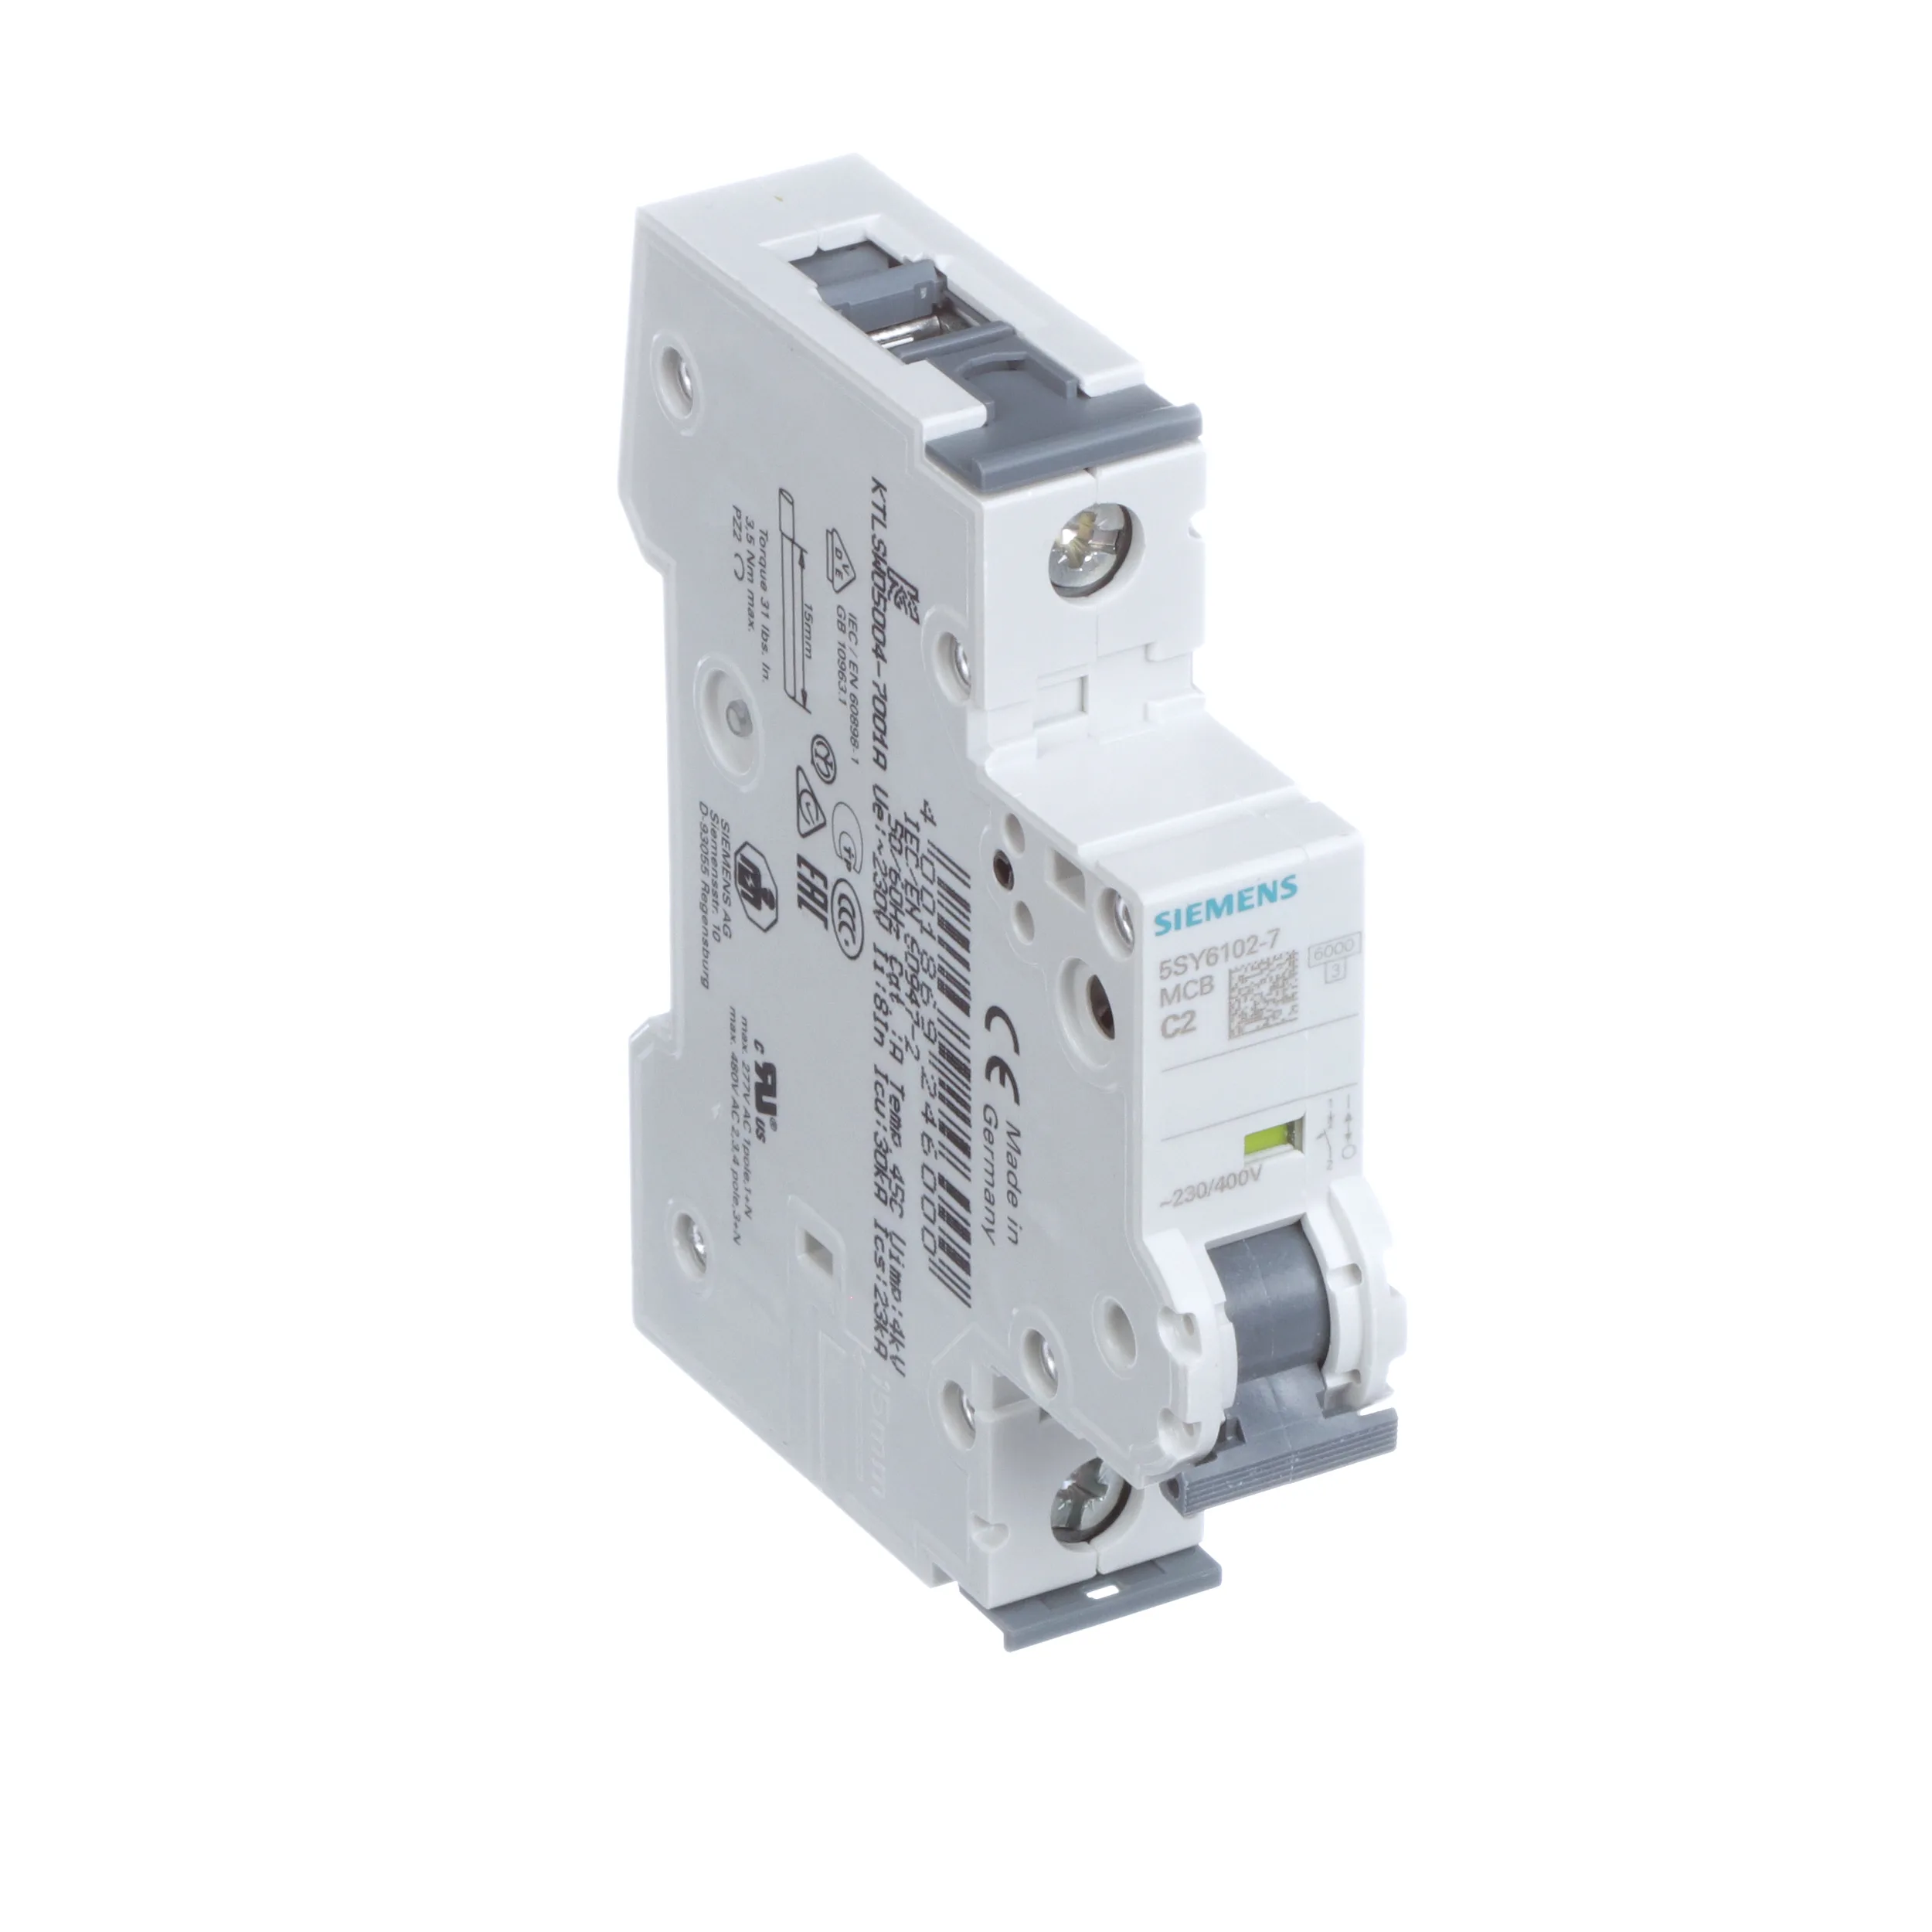 SIEMENS 5SY6102-7 SUPPLEMENTARY PROTECTOR